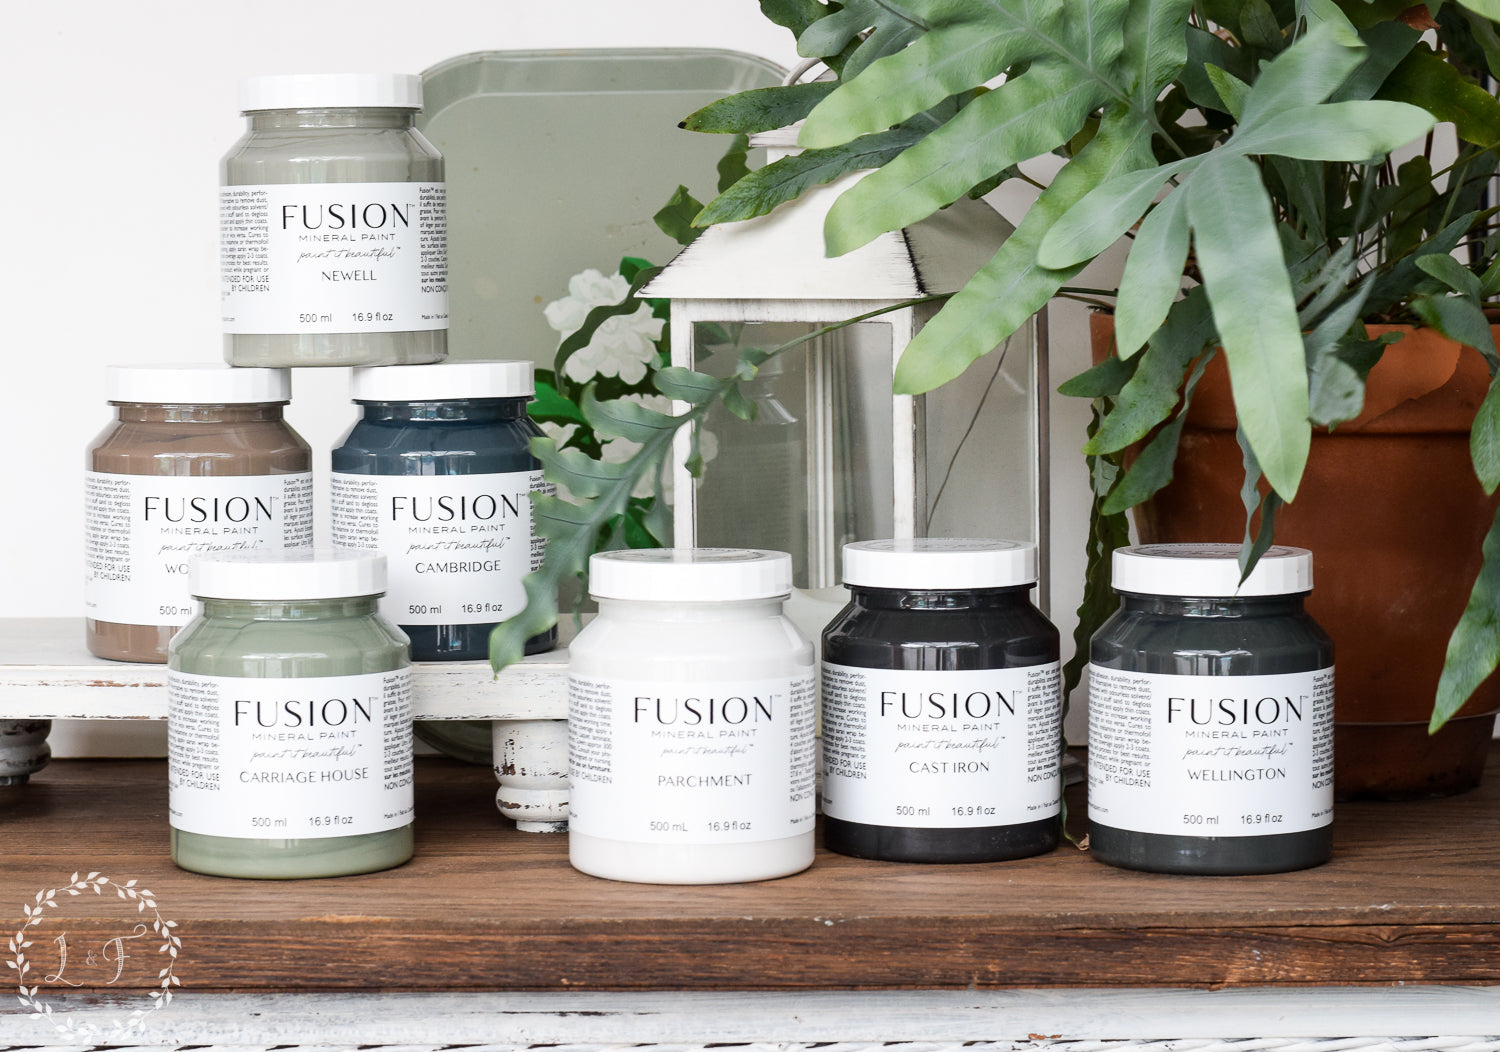 Fusion Mineral Paint in Carriage House